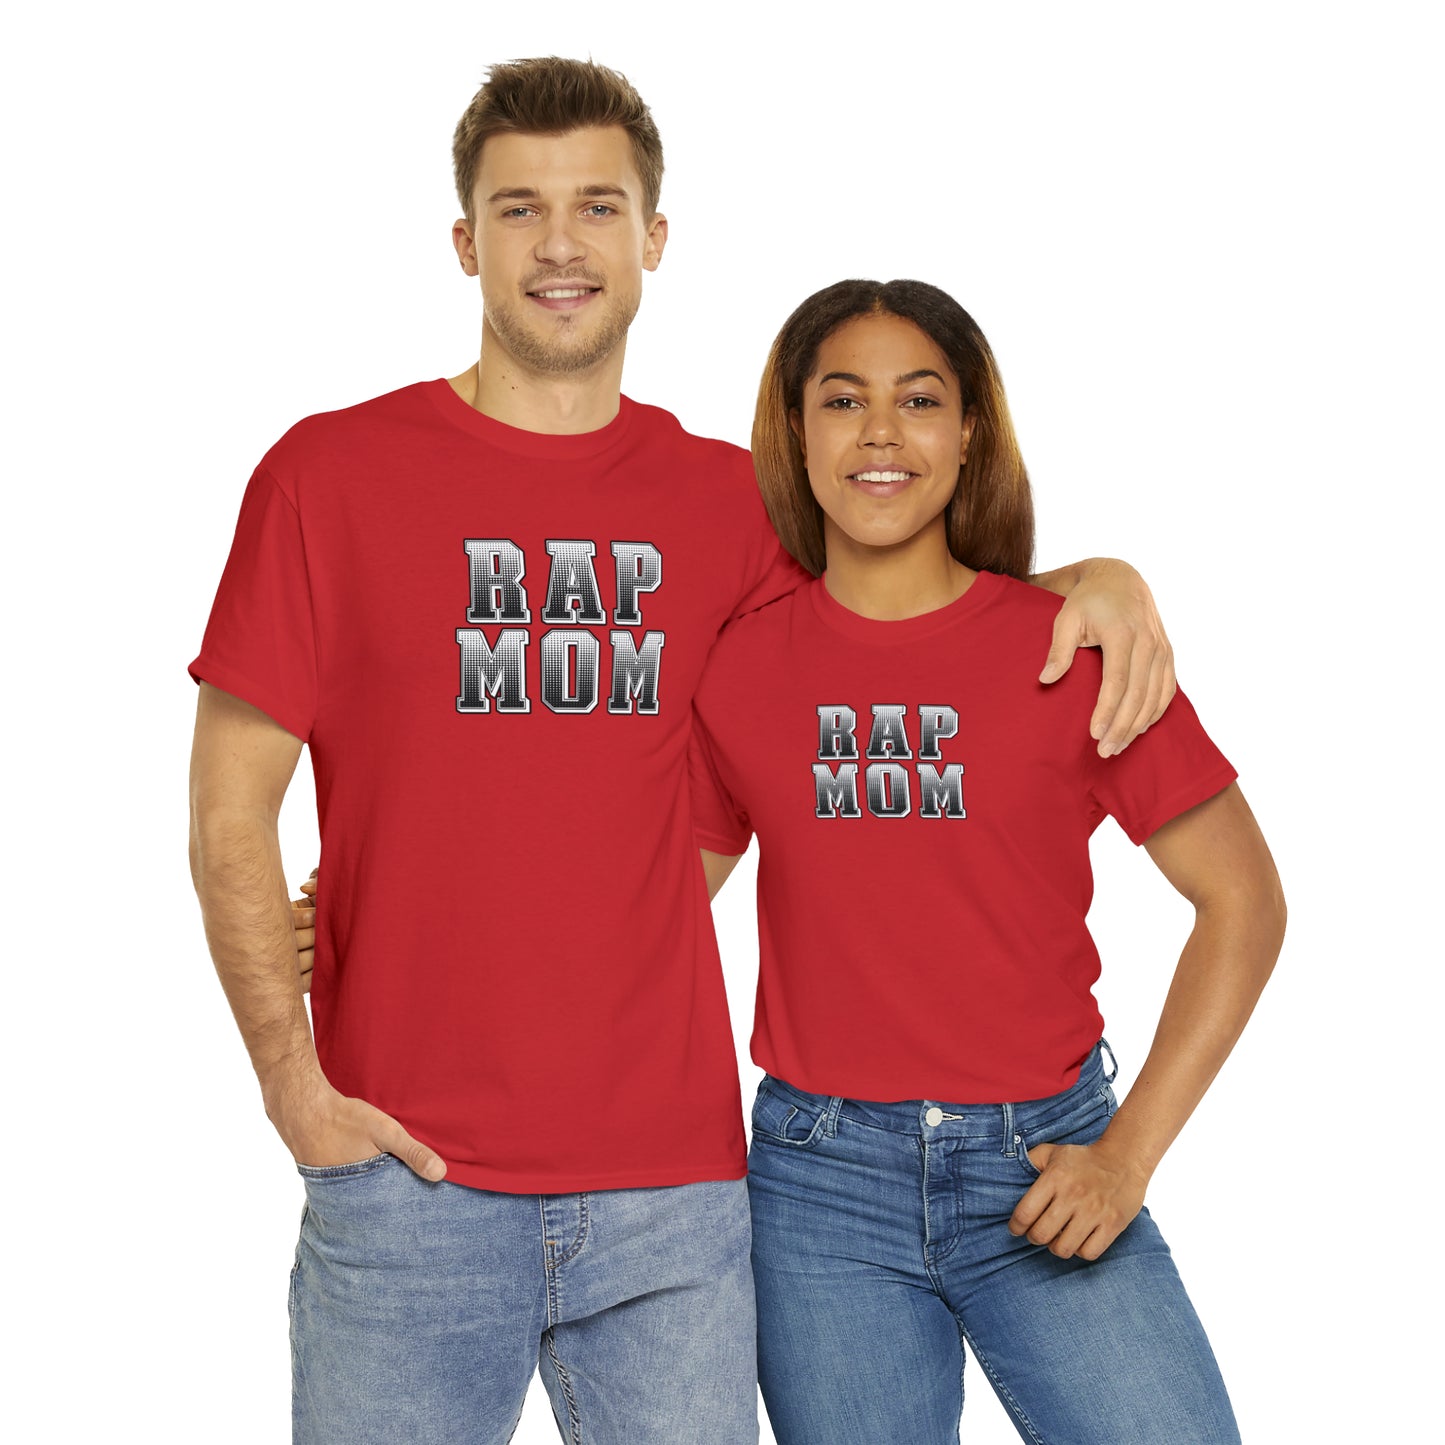 Rap Mom T-Shirt - Great gift for Mom